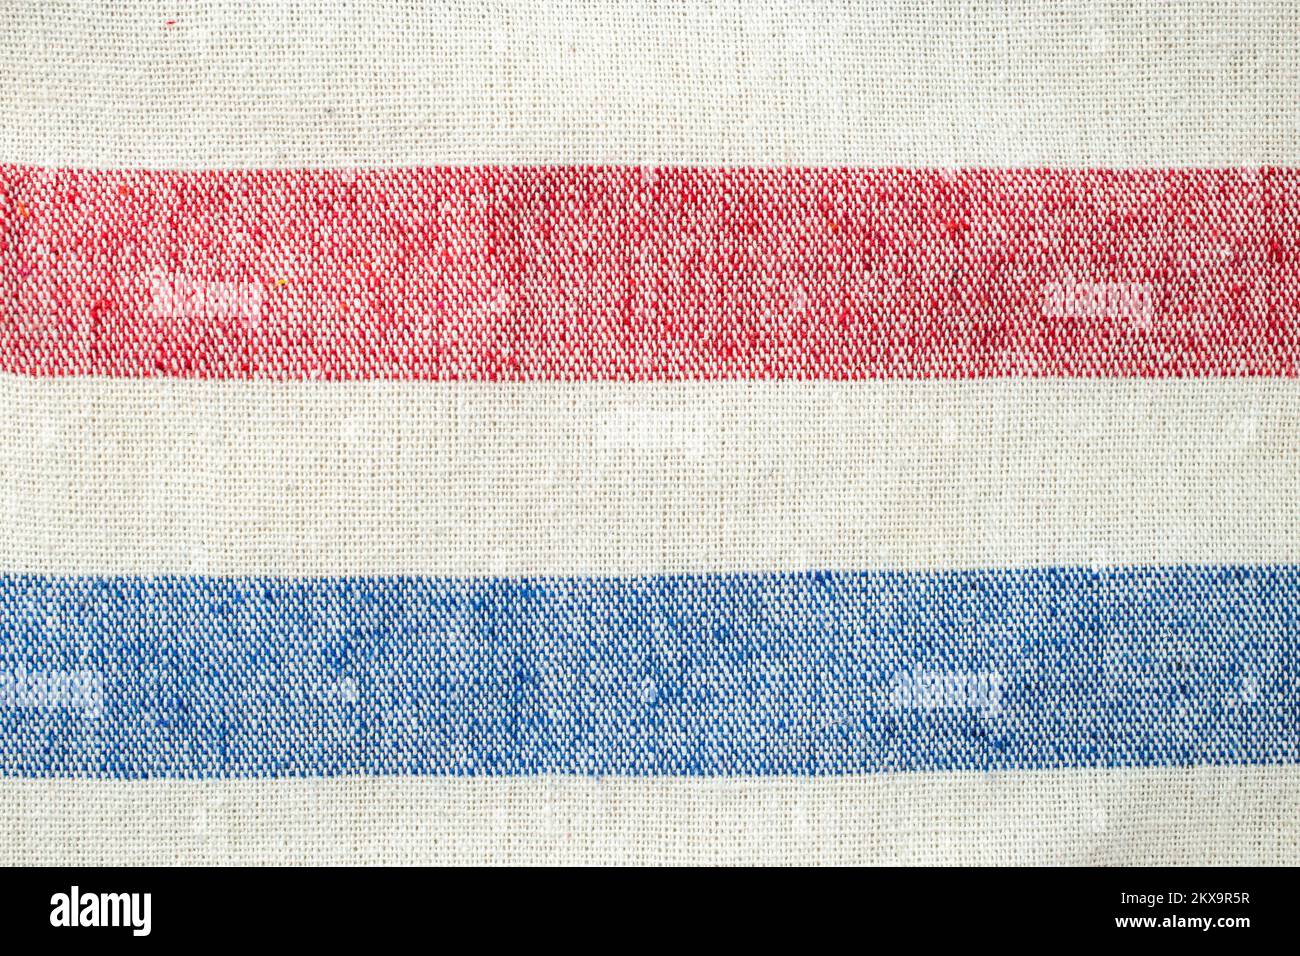 Horizontal lines, red, white and blue. Thick fabric canvas, soft focus close up Stock Photo